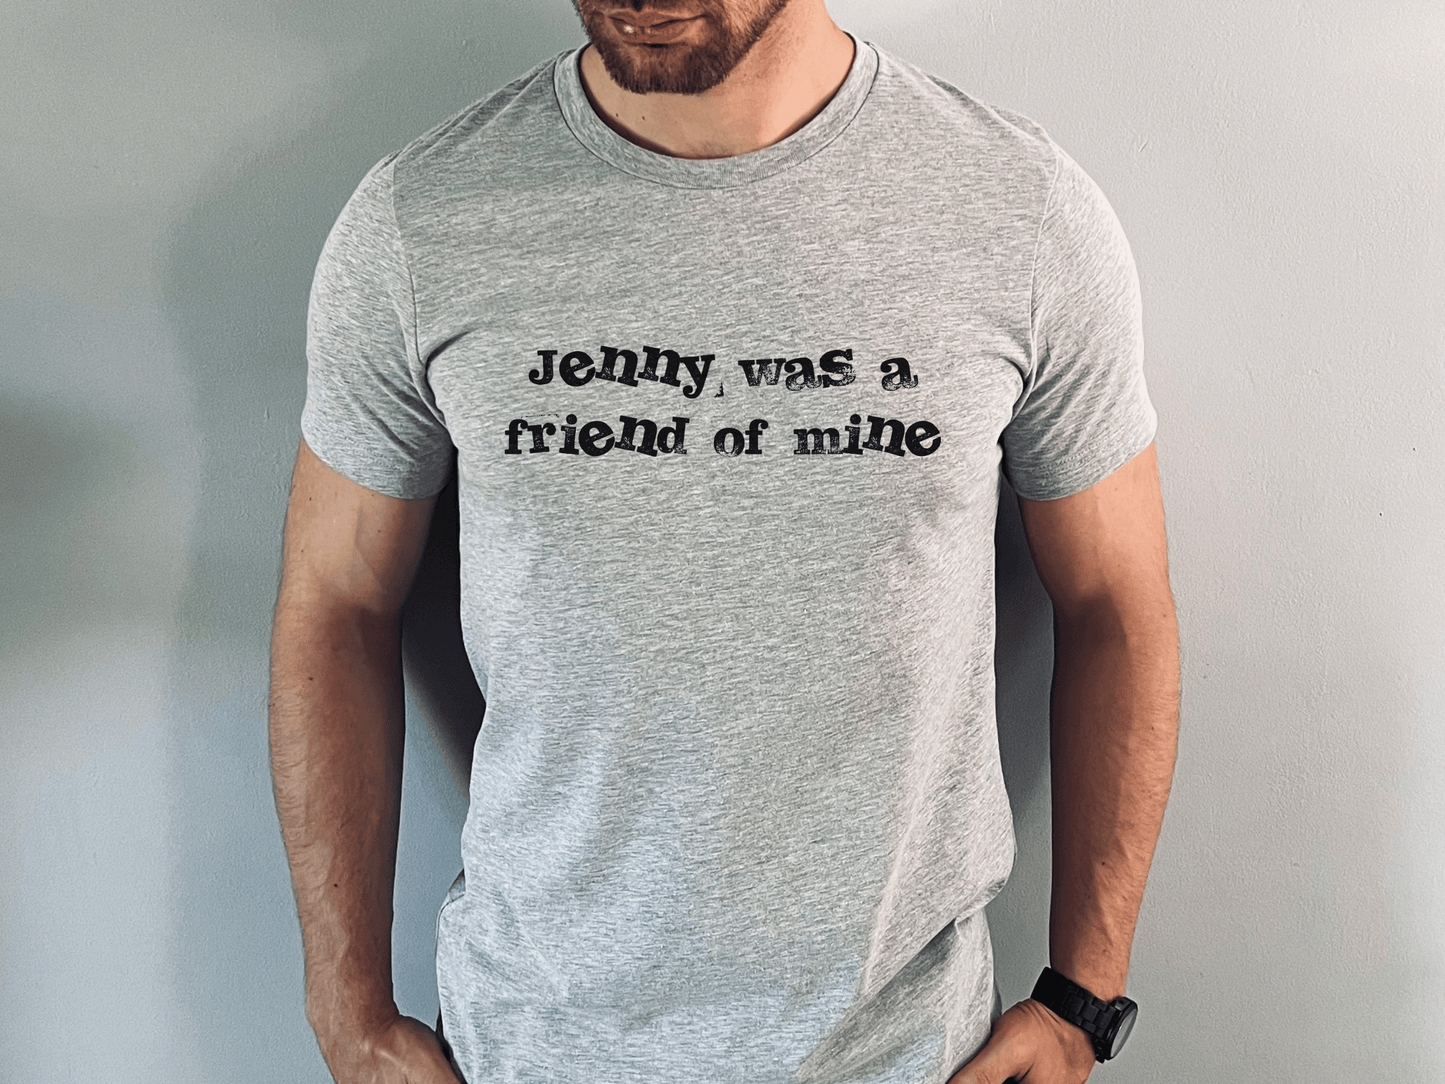 The Killers "Jenny was a Friend of Mine" T-Shirt in Athletic Heather on a male